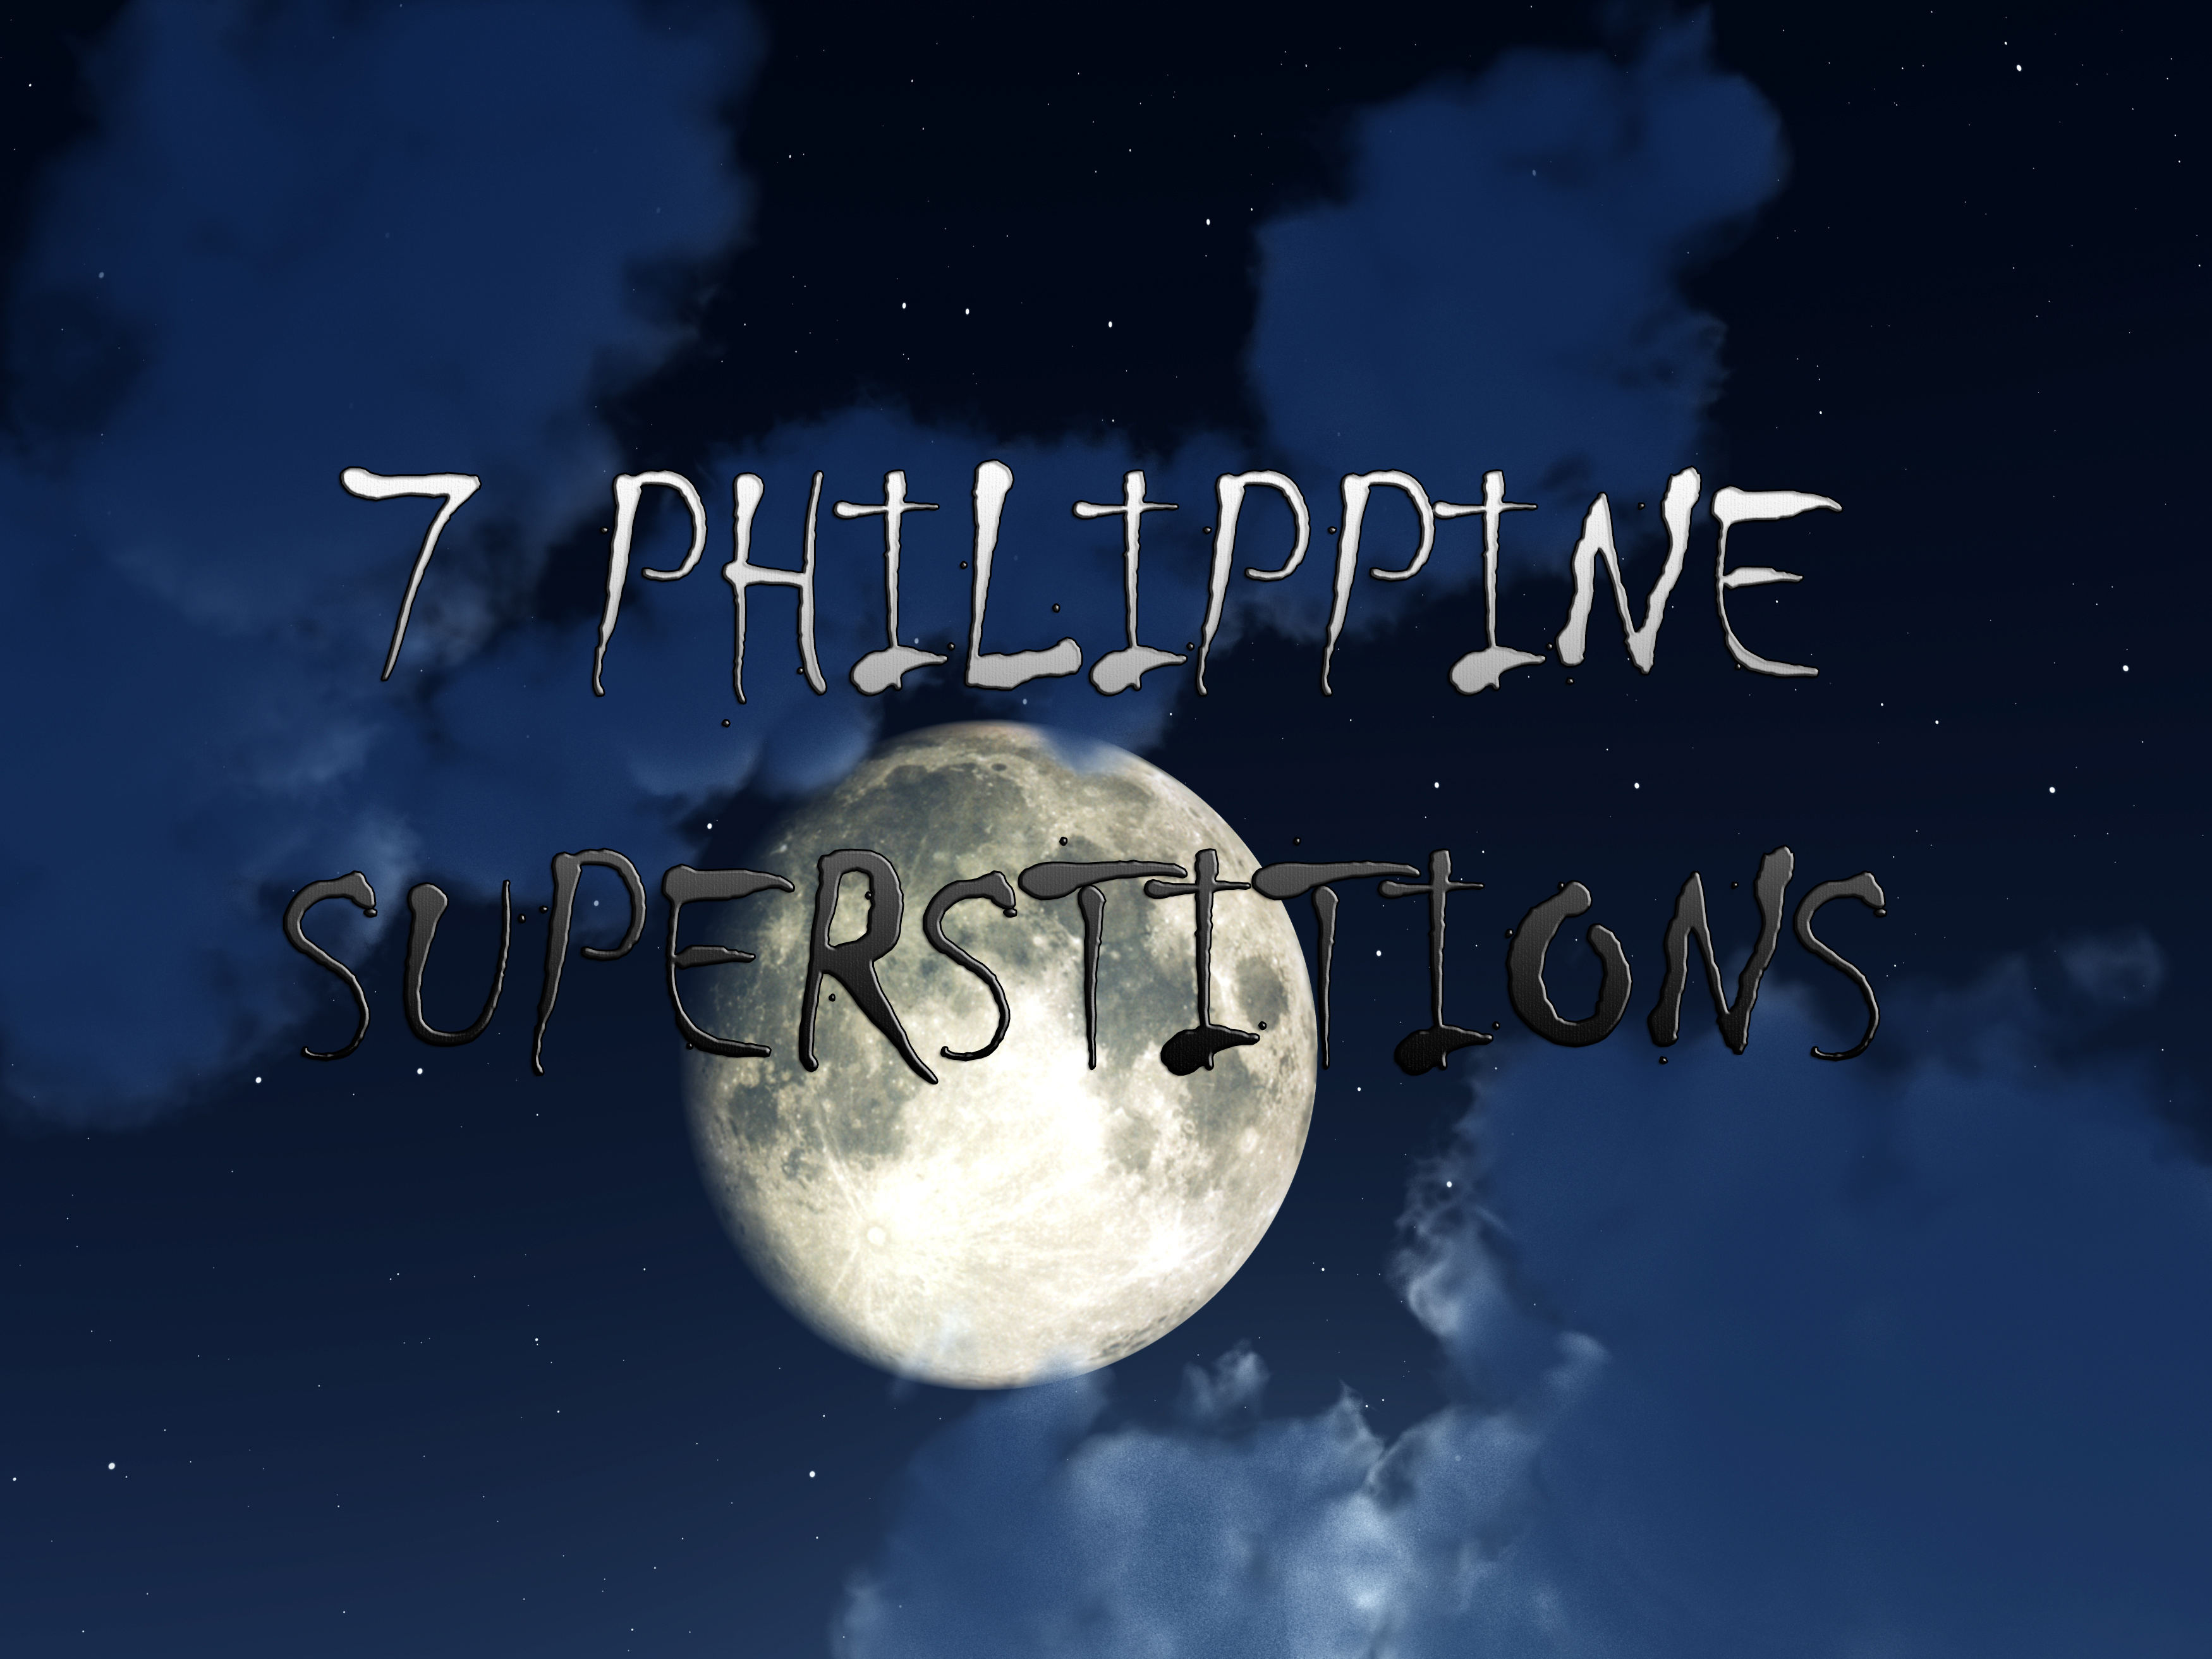 filipino superstitious beliefs about pregnancy